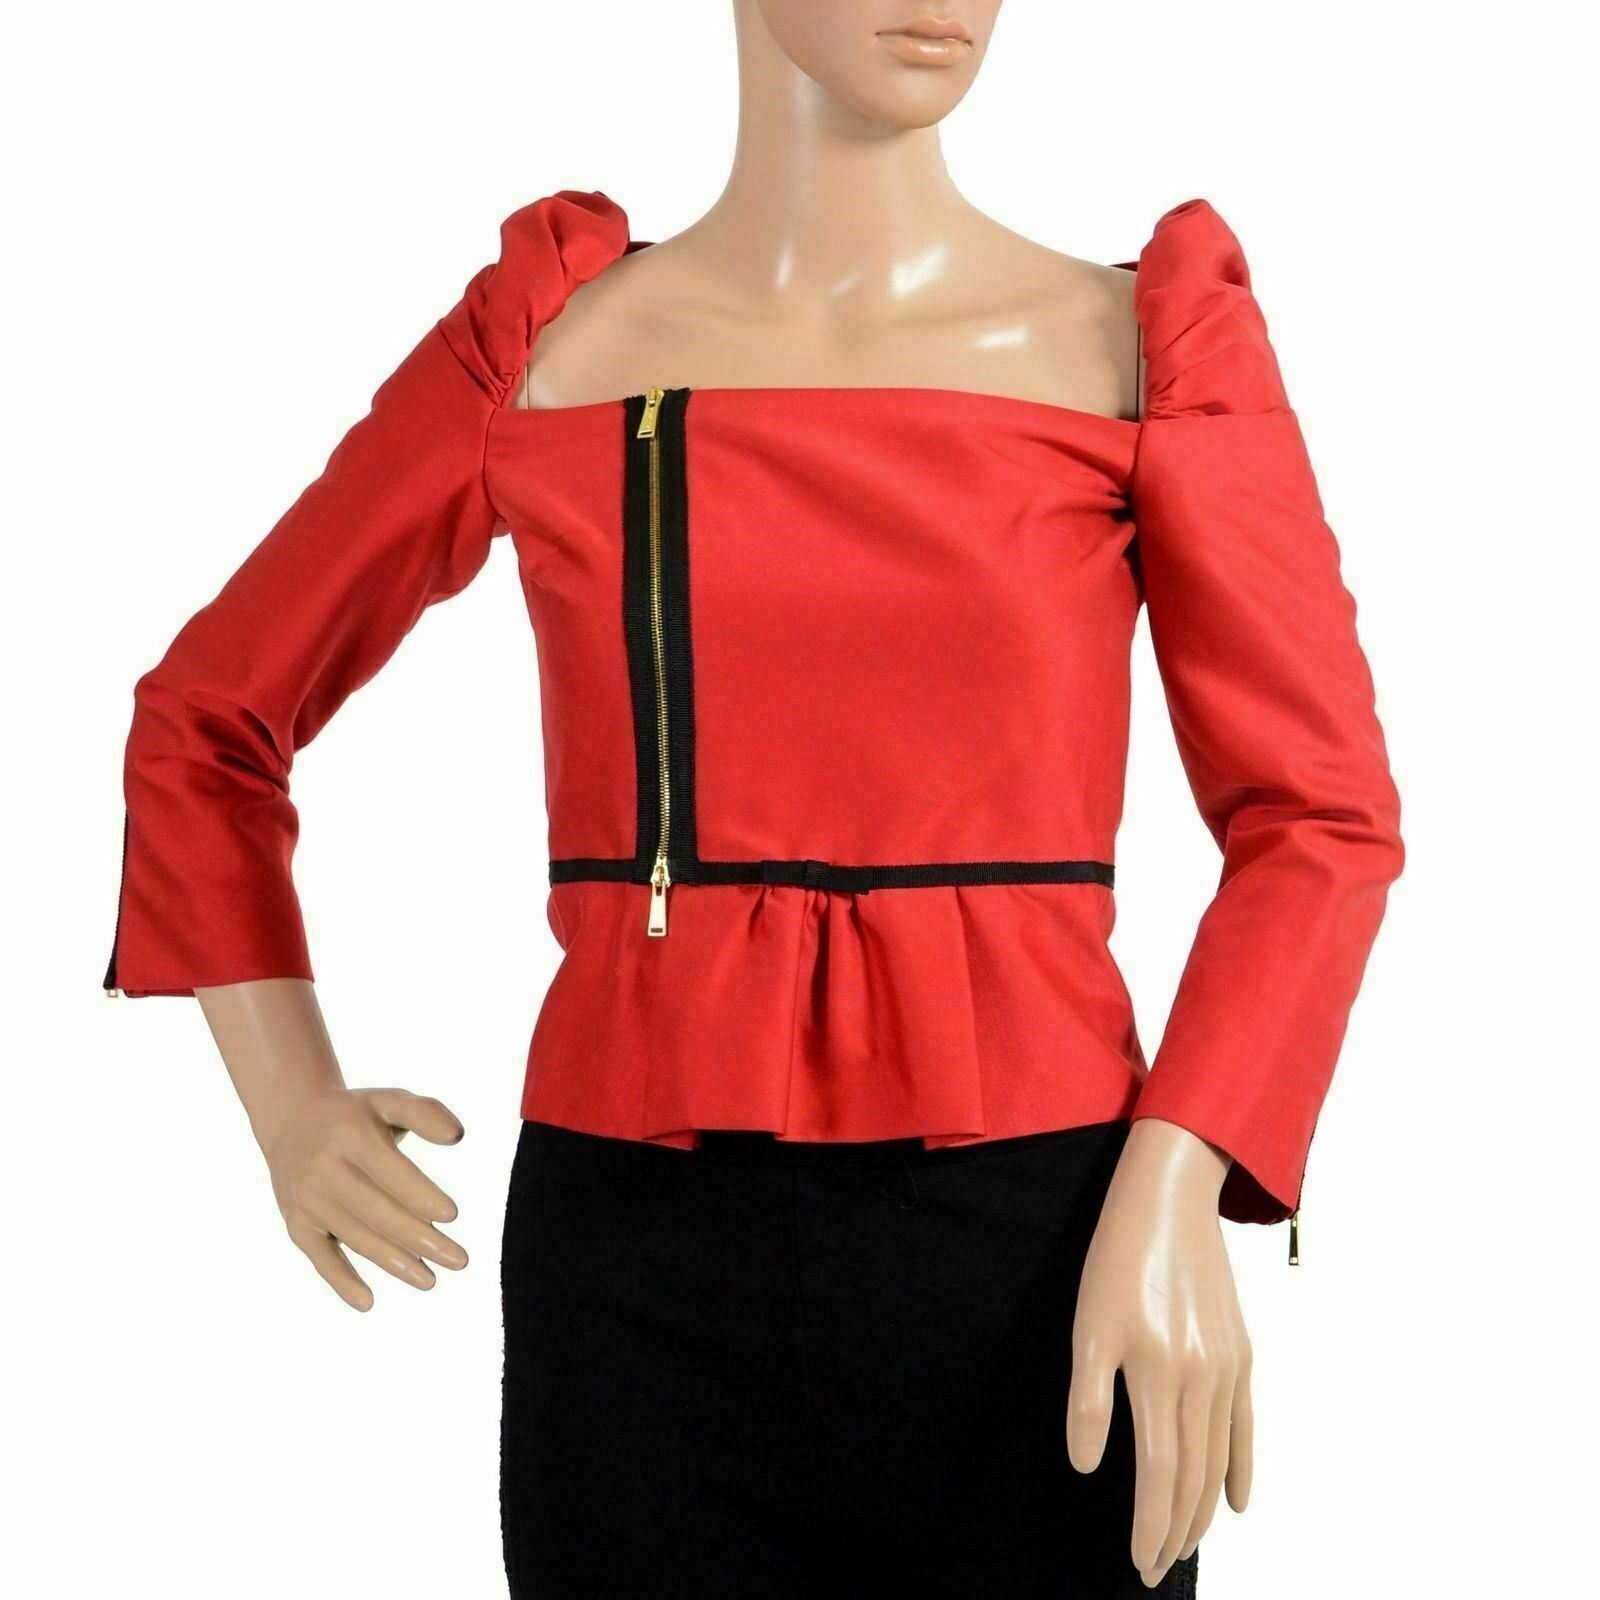 Baylis and Knight Red Nude Lace PEPLUM Low Cut Long Sleeve Top Elegant